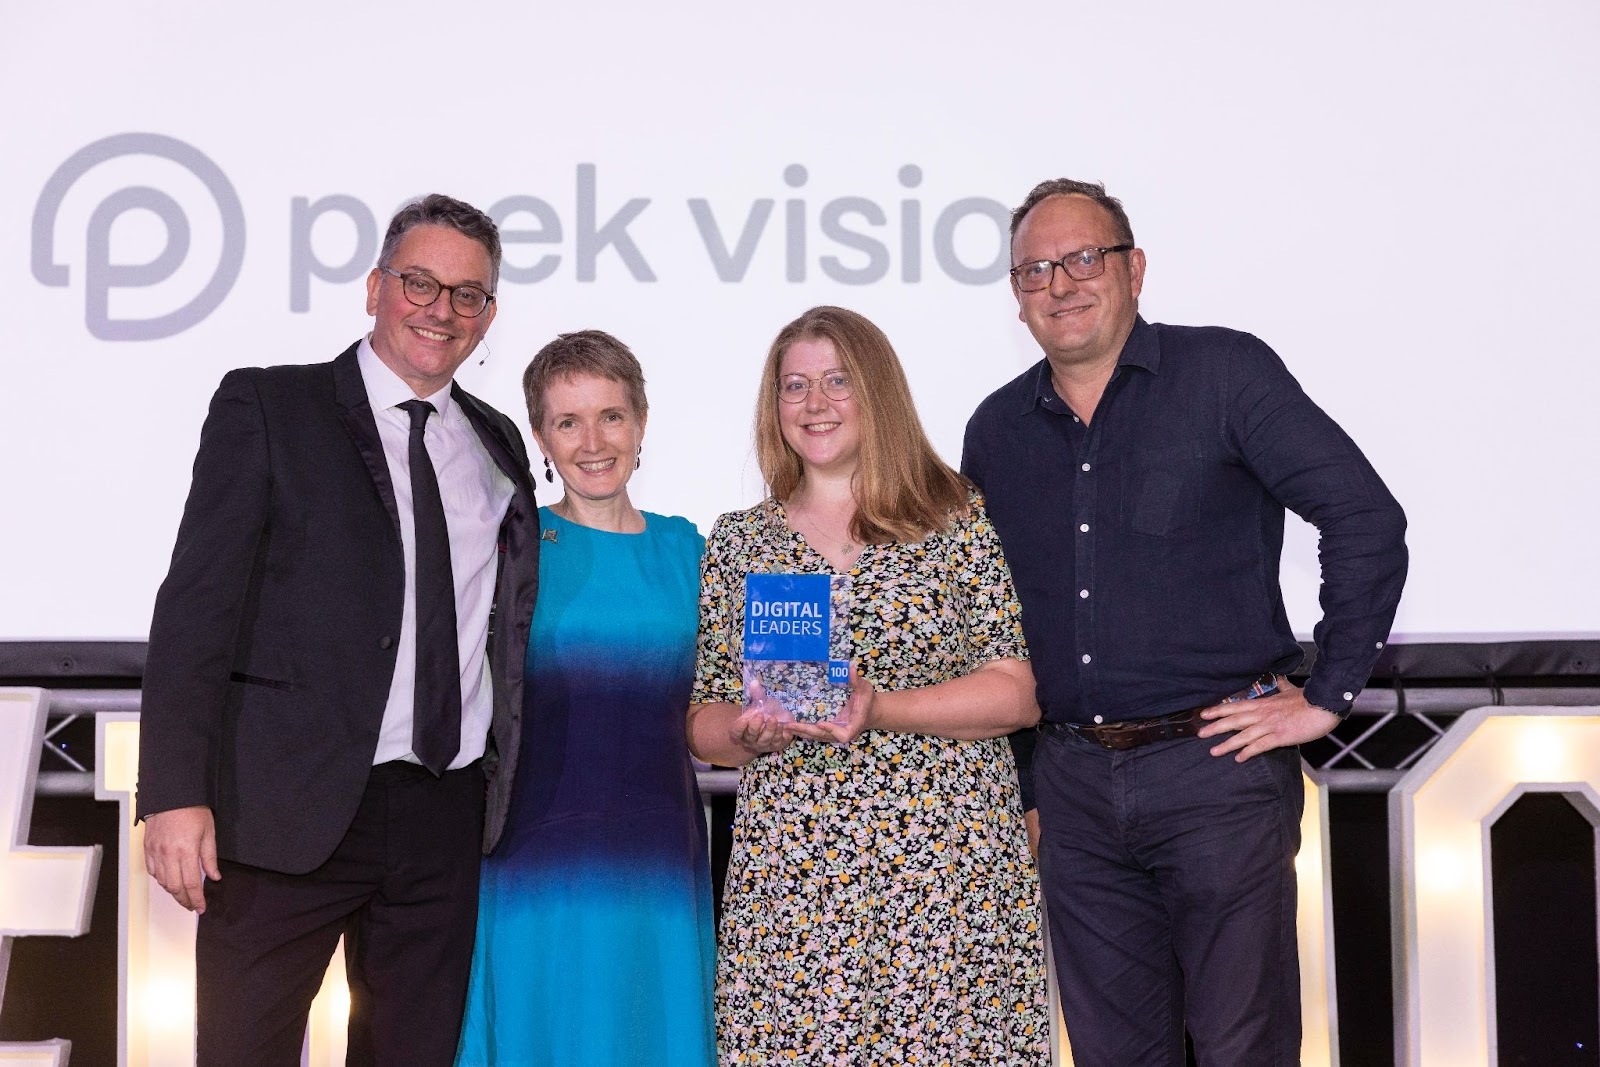 Jeanette McKenna and Marie-Claire Boyle from Peek Vision, positioned second and third from the left, at the Digital Leaders 100 award ceremony, accompanied by event host Alex Boardman and category sponsor Blaise Hamond, in a celebratory and prestigious setting.